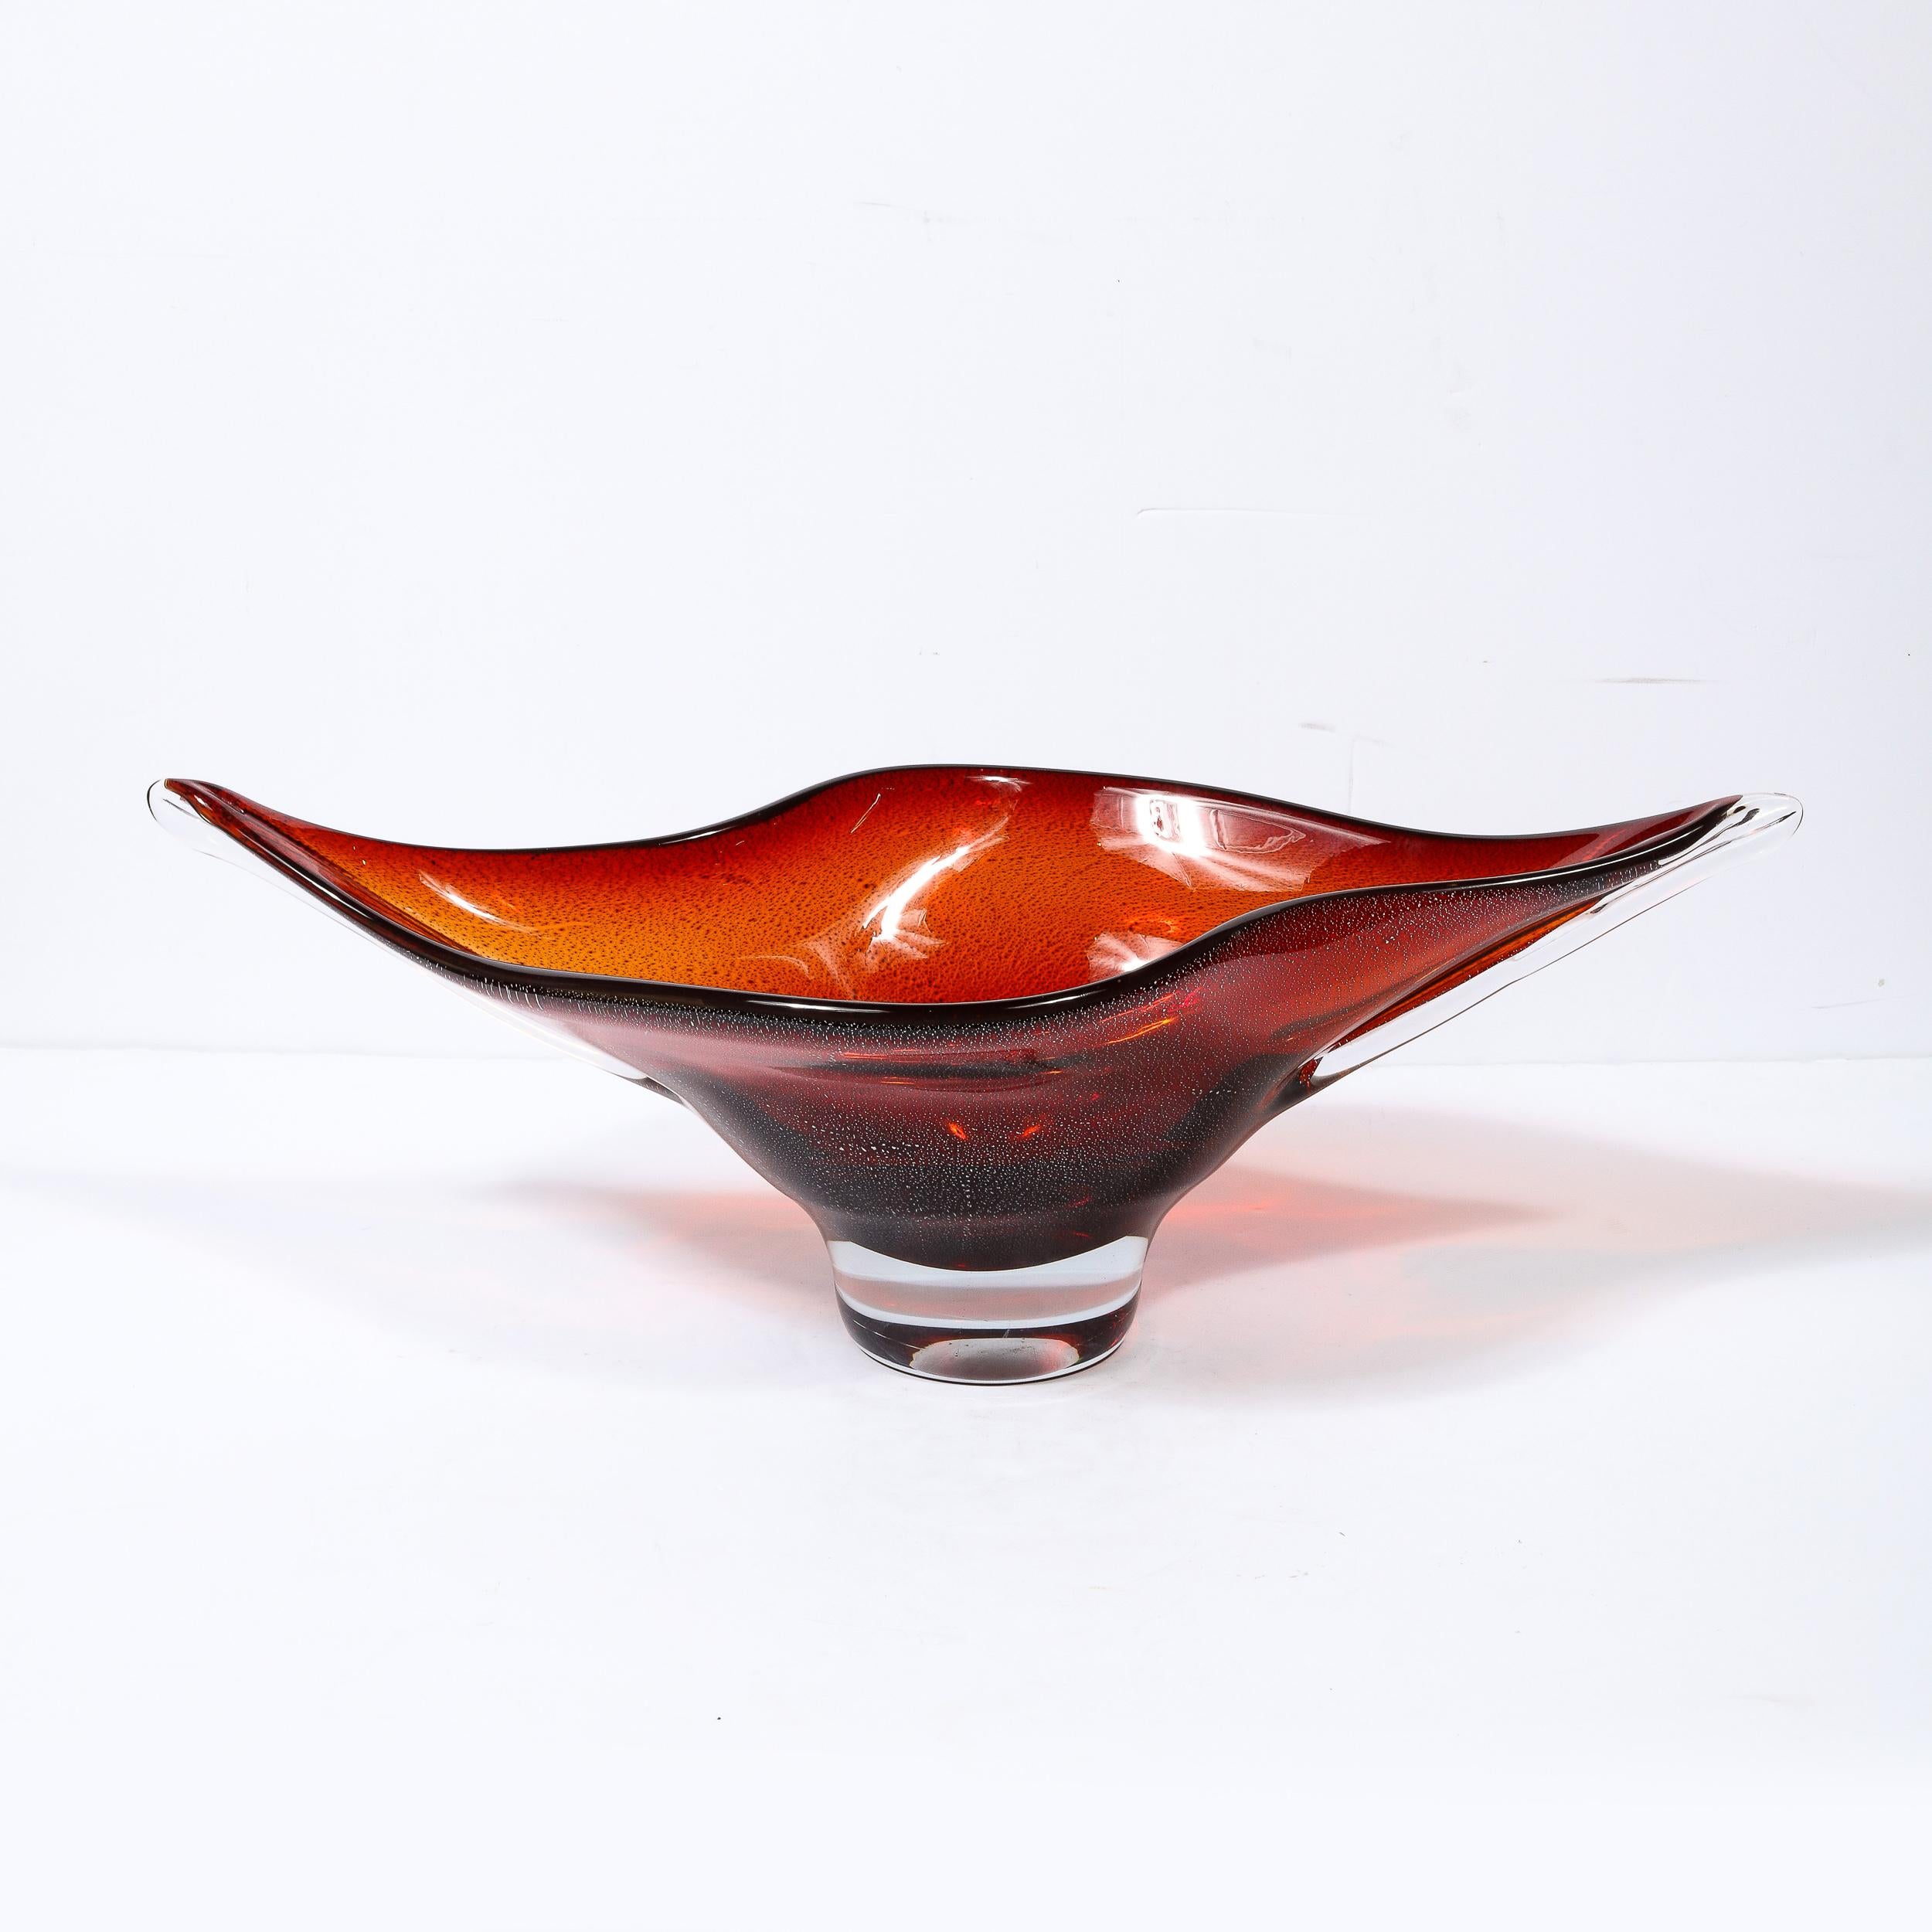 This stunning Mid-Century Modern centerpiece bowl was realized in Murano, Italy- the island off the coast of Venice renowned for centuries for its superlative glass blowing- circa 1960. It features an elliptical form with sinuously curved sides and